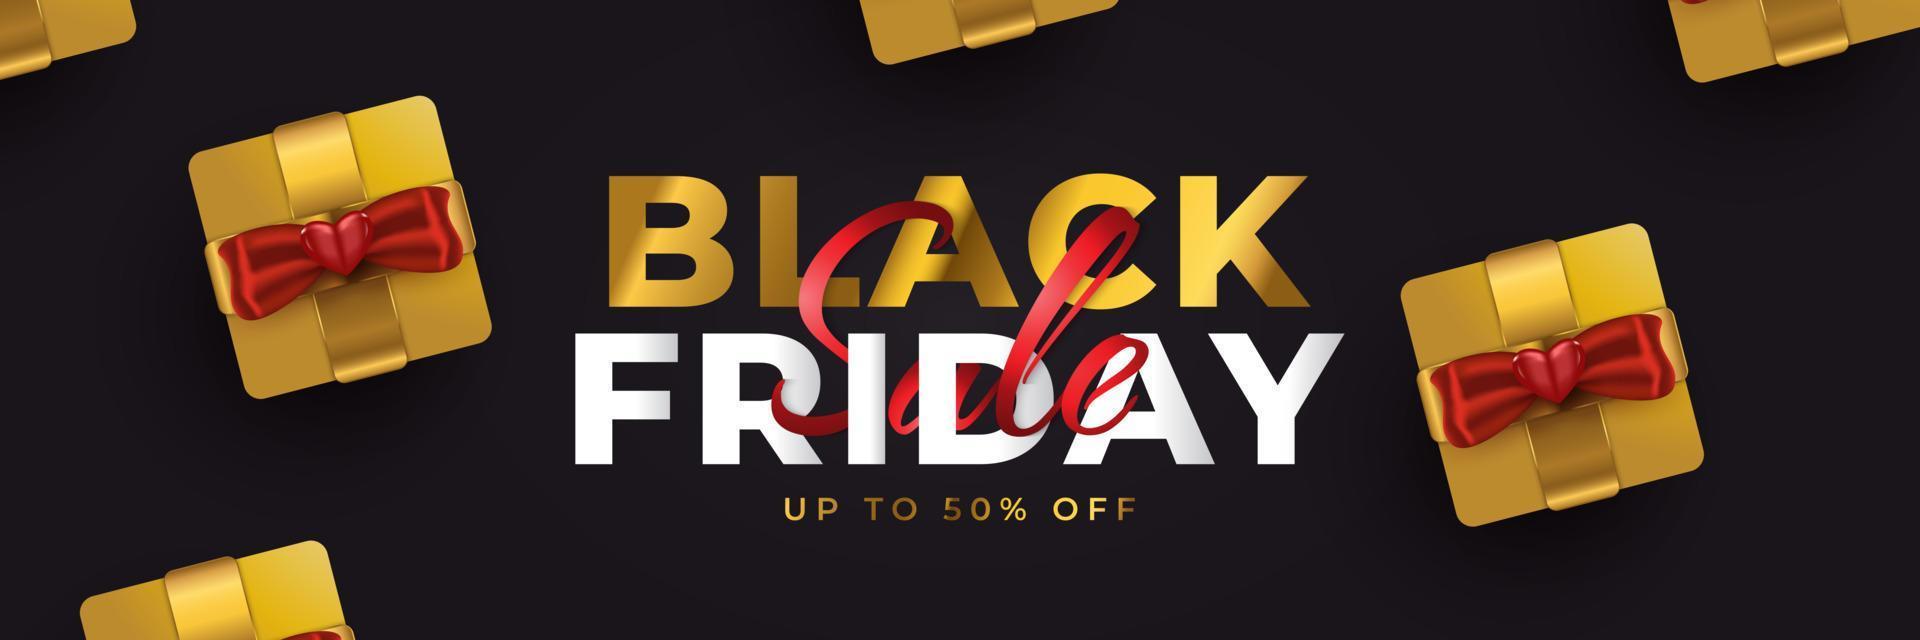 Black Friday Sale Banner with Realistic Gold Gift Boxes on Black Background. Advertising and Promotion Banner Design for Black Friday Campaign vector